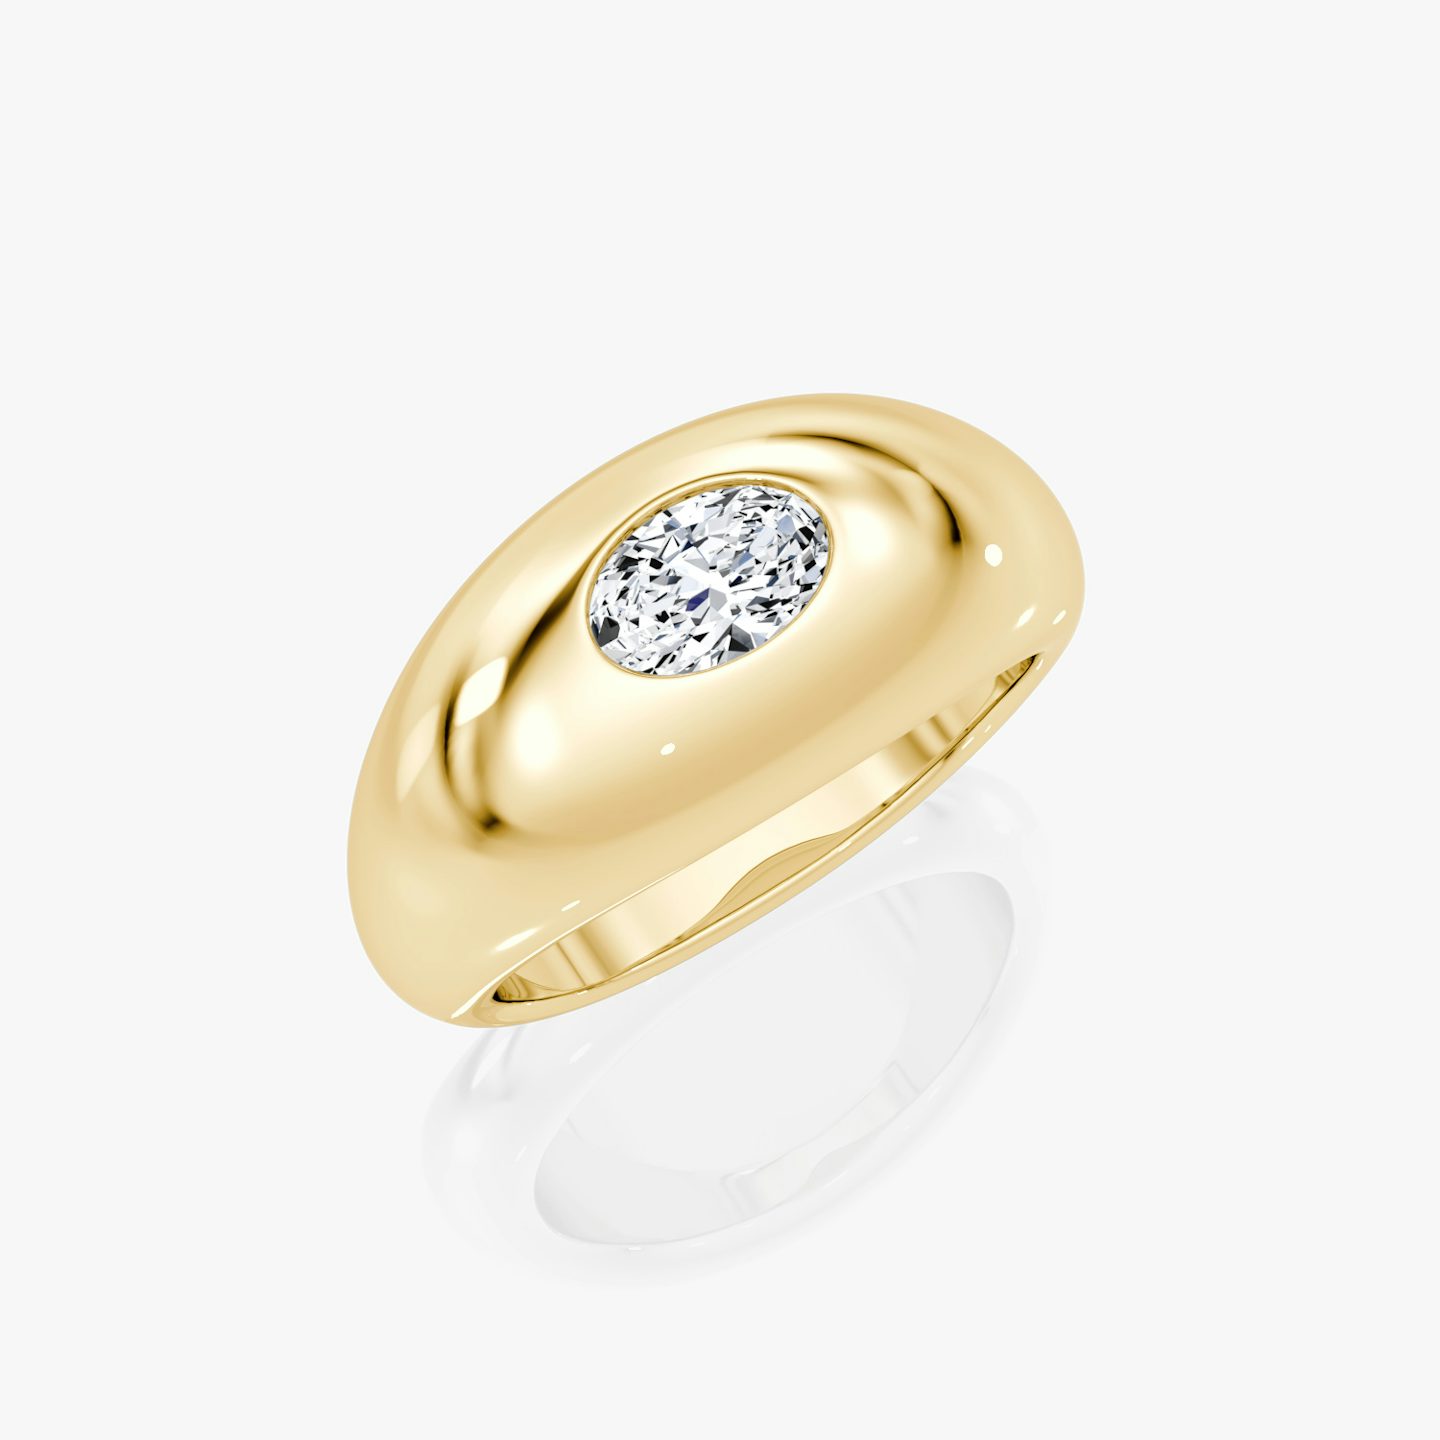 Bague Dome | Ovale | 14k | Or jaune 18 carats